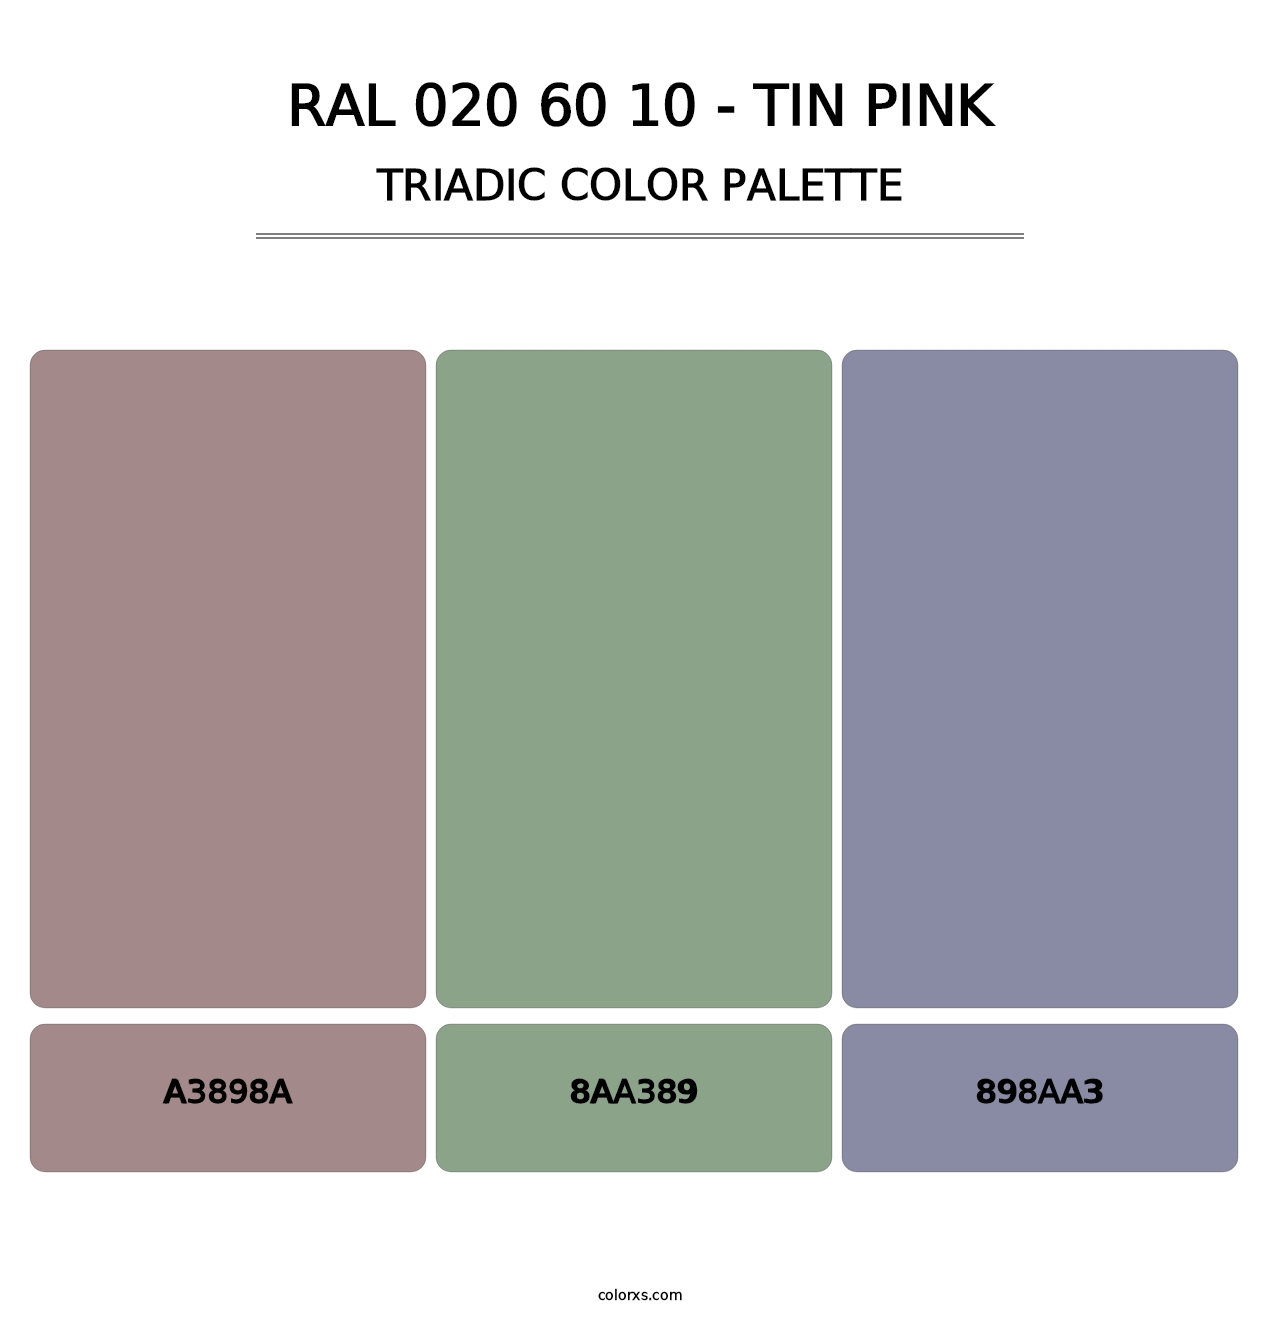 RAL 020 60 10 - Tin Pink - Triadic Color Palette